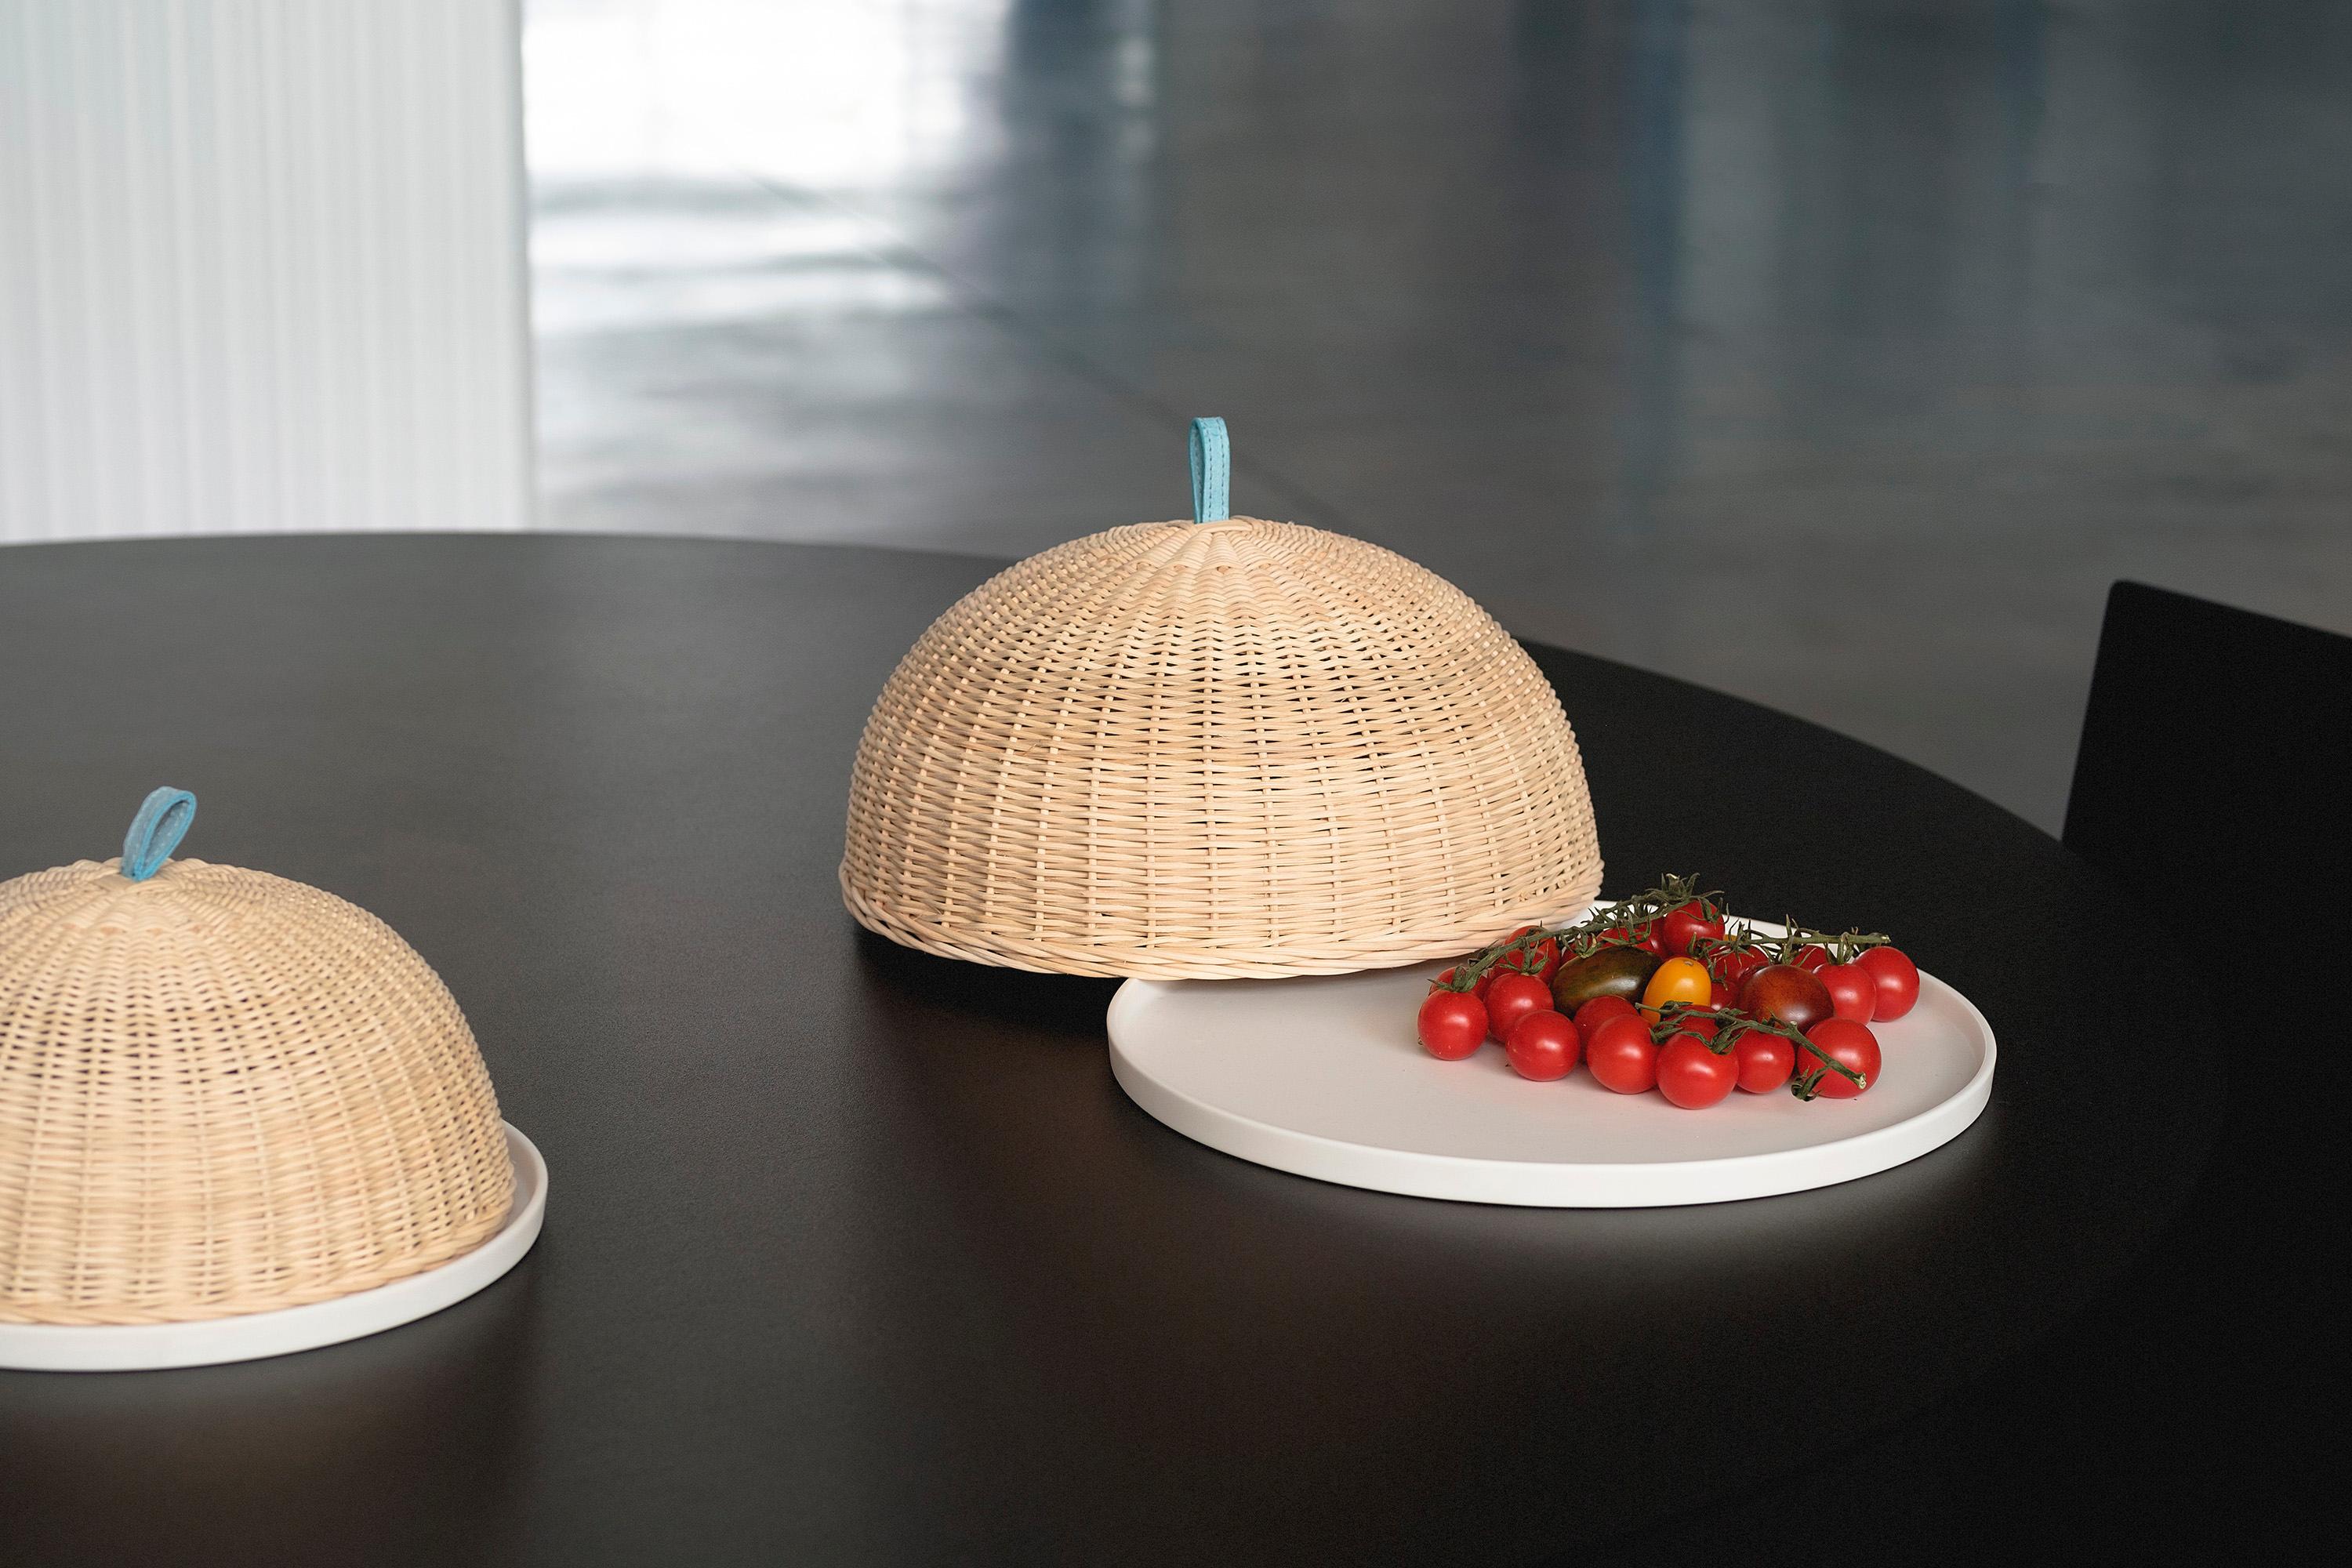 Like a pergola shelters from the sun on hot summer days, in this piece the wicker dome protects the contents of the porcelain tray.
The tray is minimal and characterized by a matte finish wich makes it pleasant to the touch, the covering is